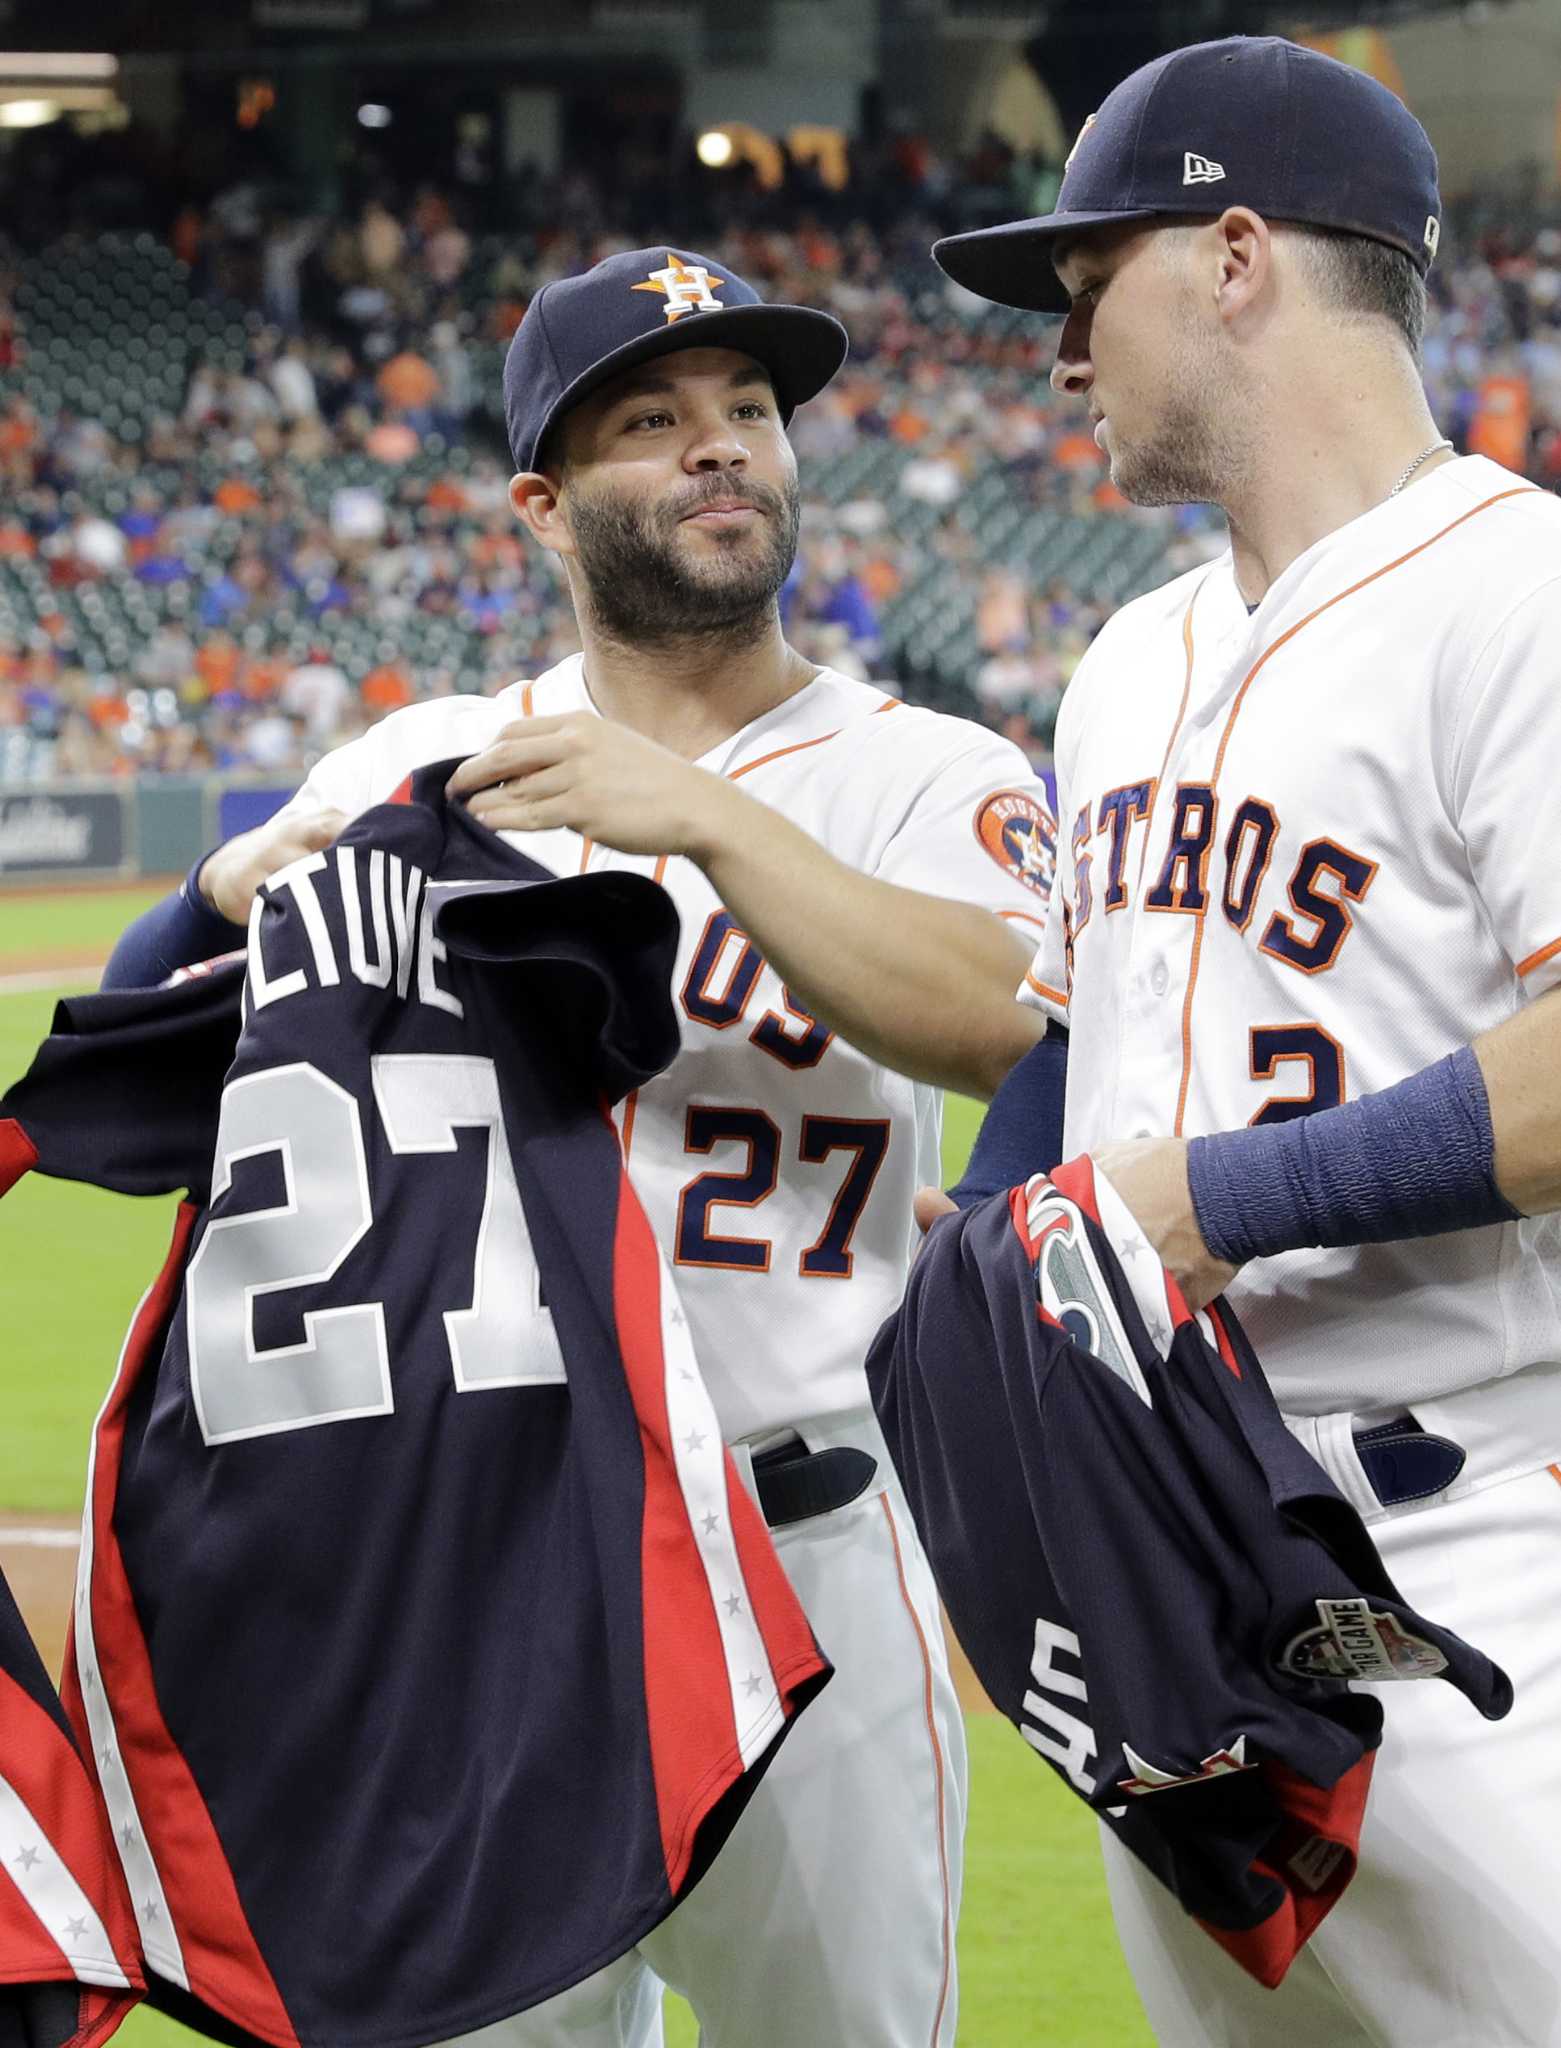 Is Jose Altuve Really This Humble? Astros Star Keeps Defying Modern  Celebrity as He Shadows J.J. Watt, Builds Up Bregman and Dominates On the  Reg